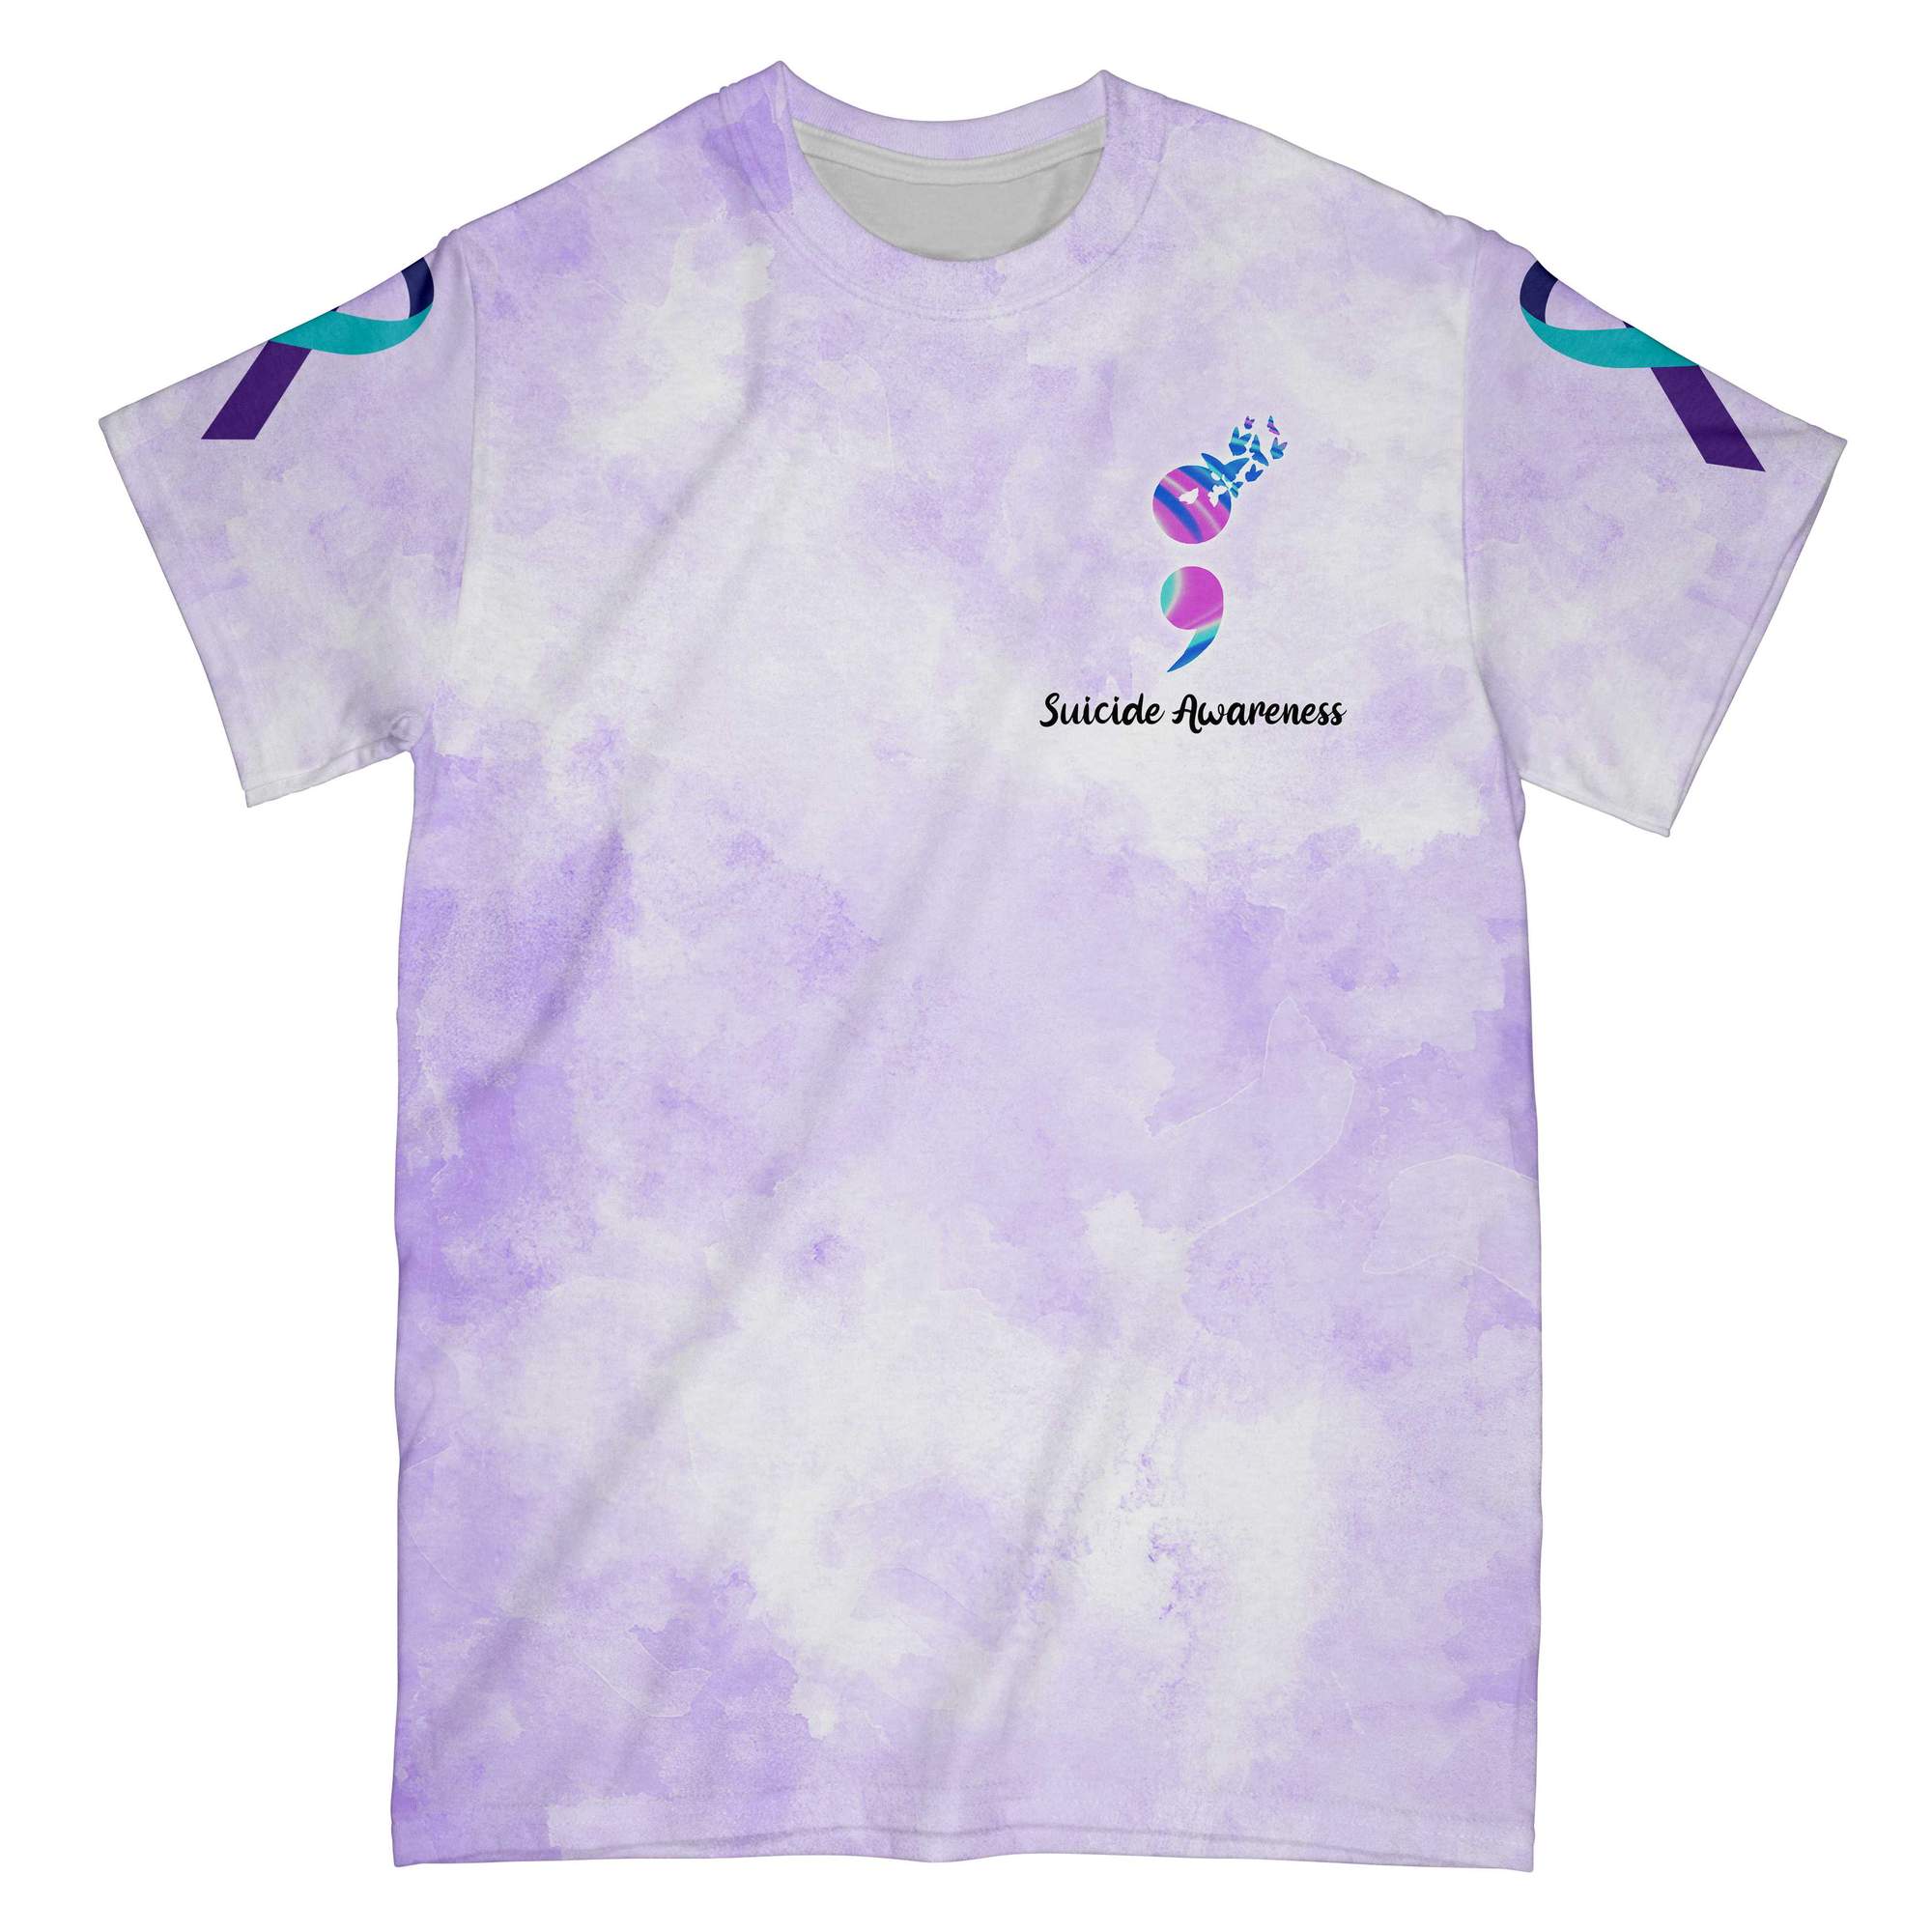 Suicide Awareness In September We Wear Teal and Purple 3d shirt 4